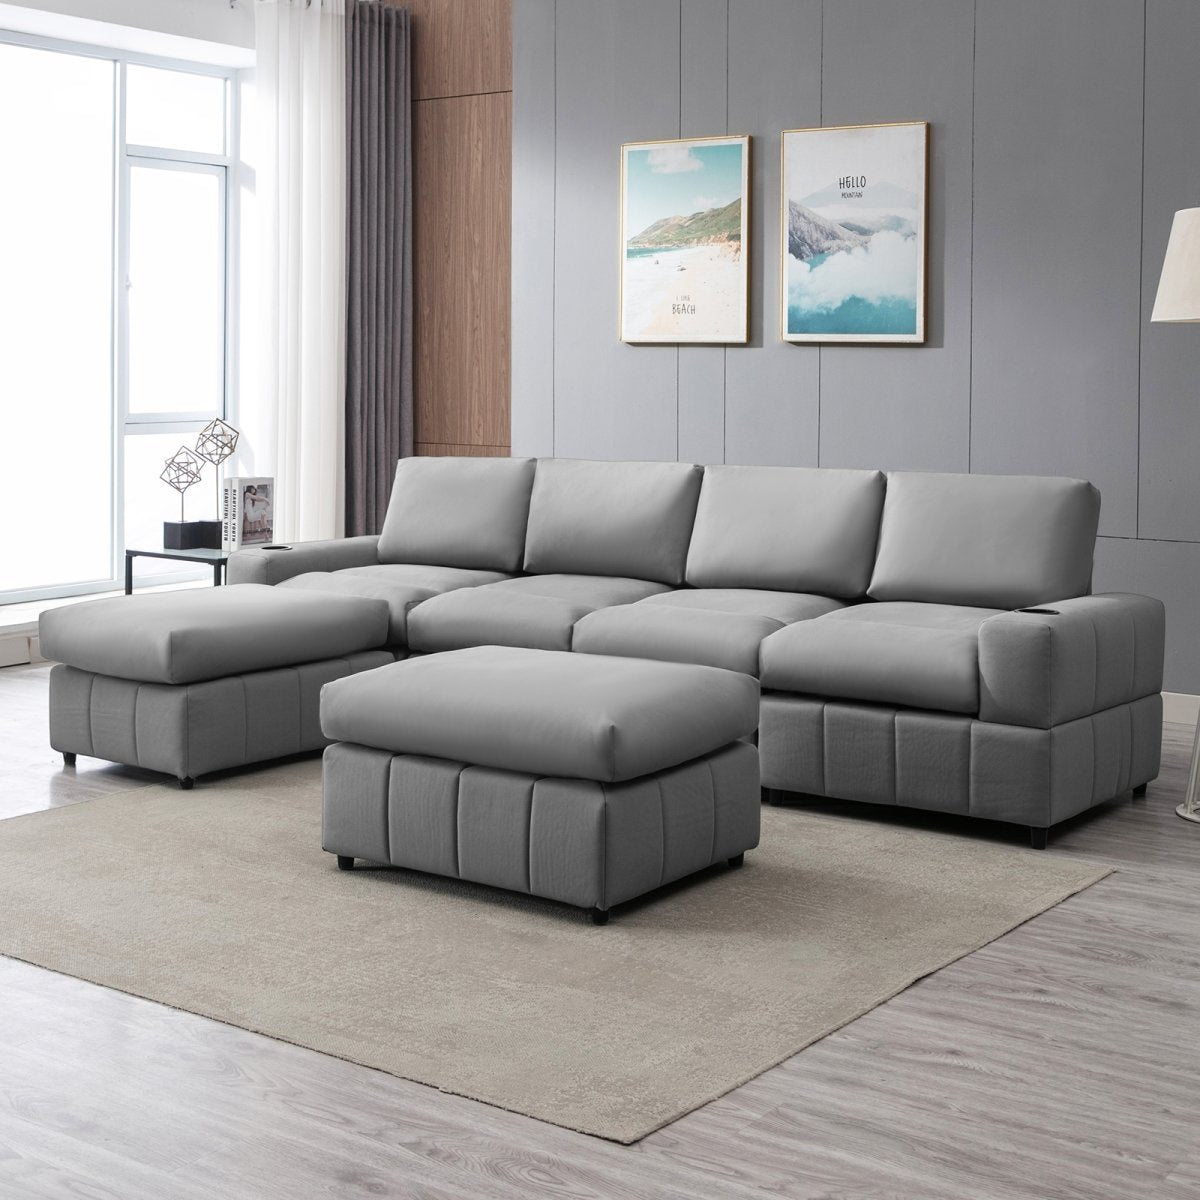 Convertible Sectional Sofa | U Shaped Modular Couch with Cup Holder - Mjkonesectional sofa